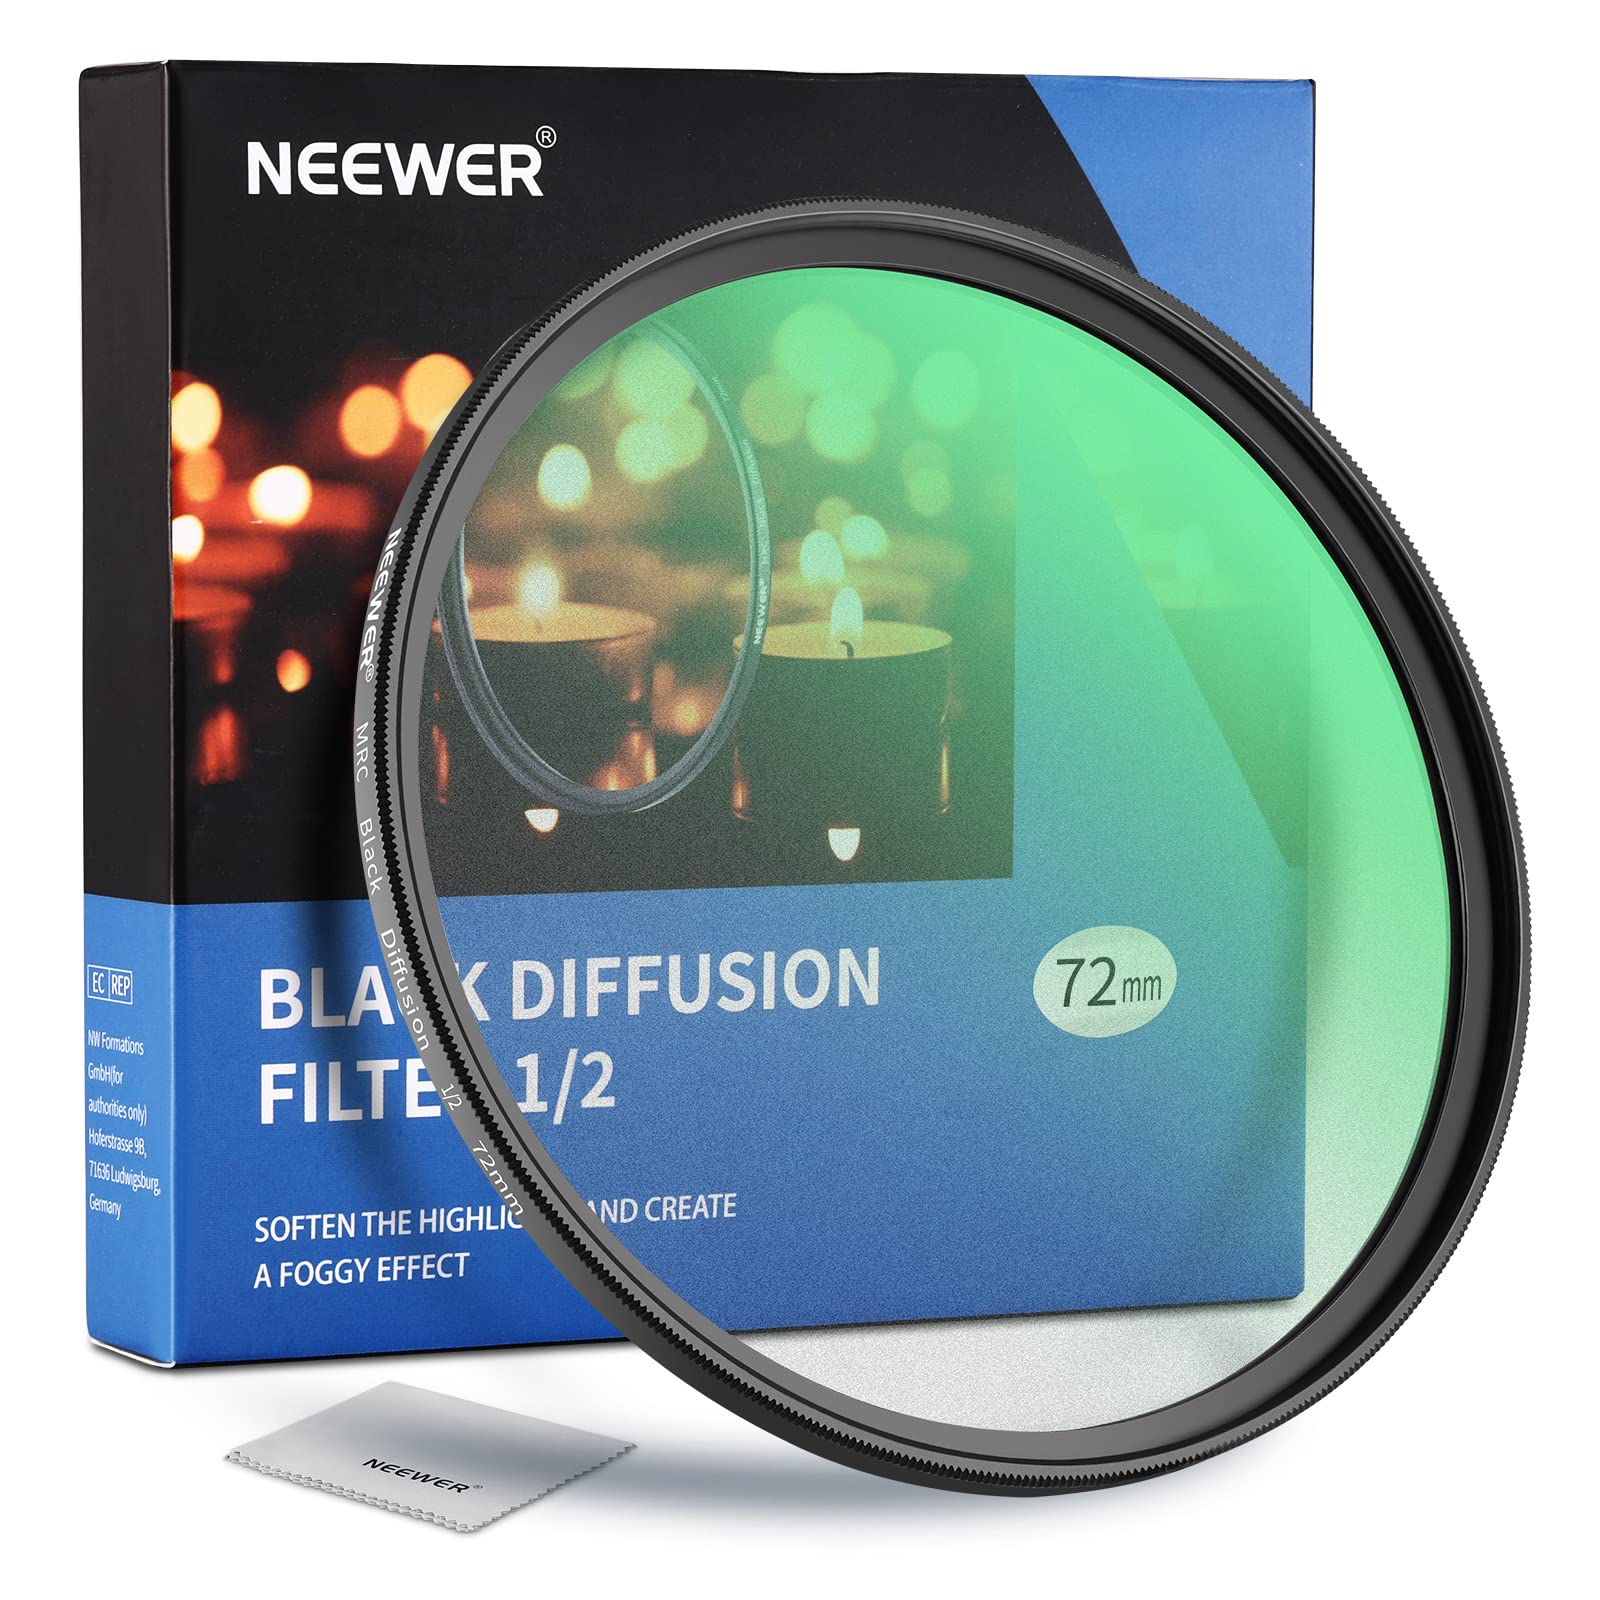 NEEWER 72mm Black Diffusion 1/2 Filter Mist Dreamy Cinematic Effect Filter Ultra Slim Water Repellent Scratch Resistant HD Optical Glass, 30 Layers Nano Coatings for Video/Vlog/Portrait Photography